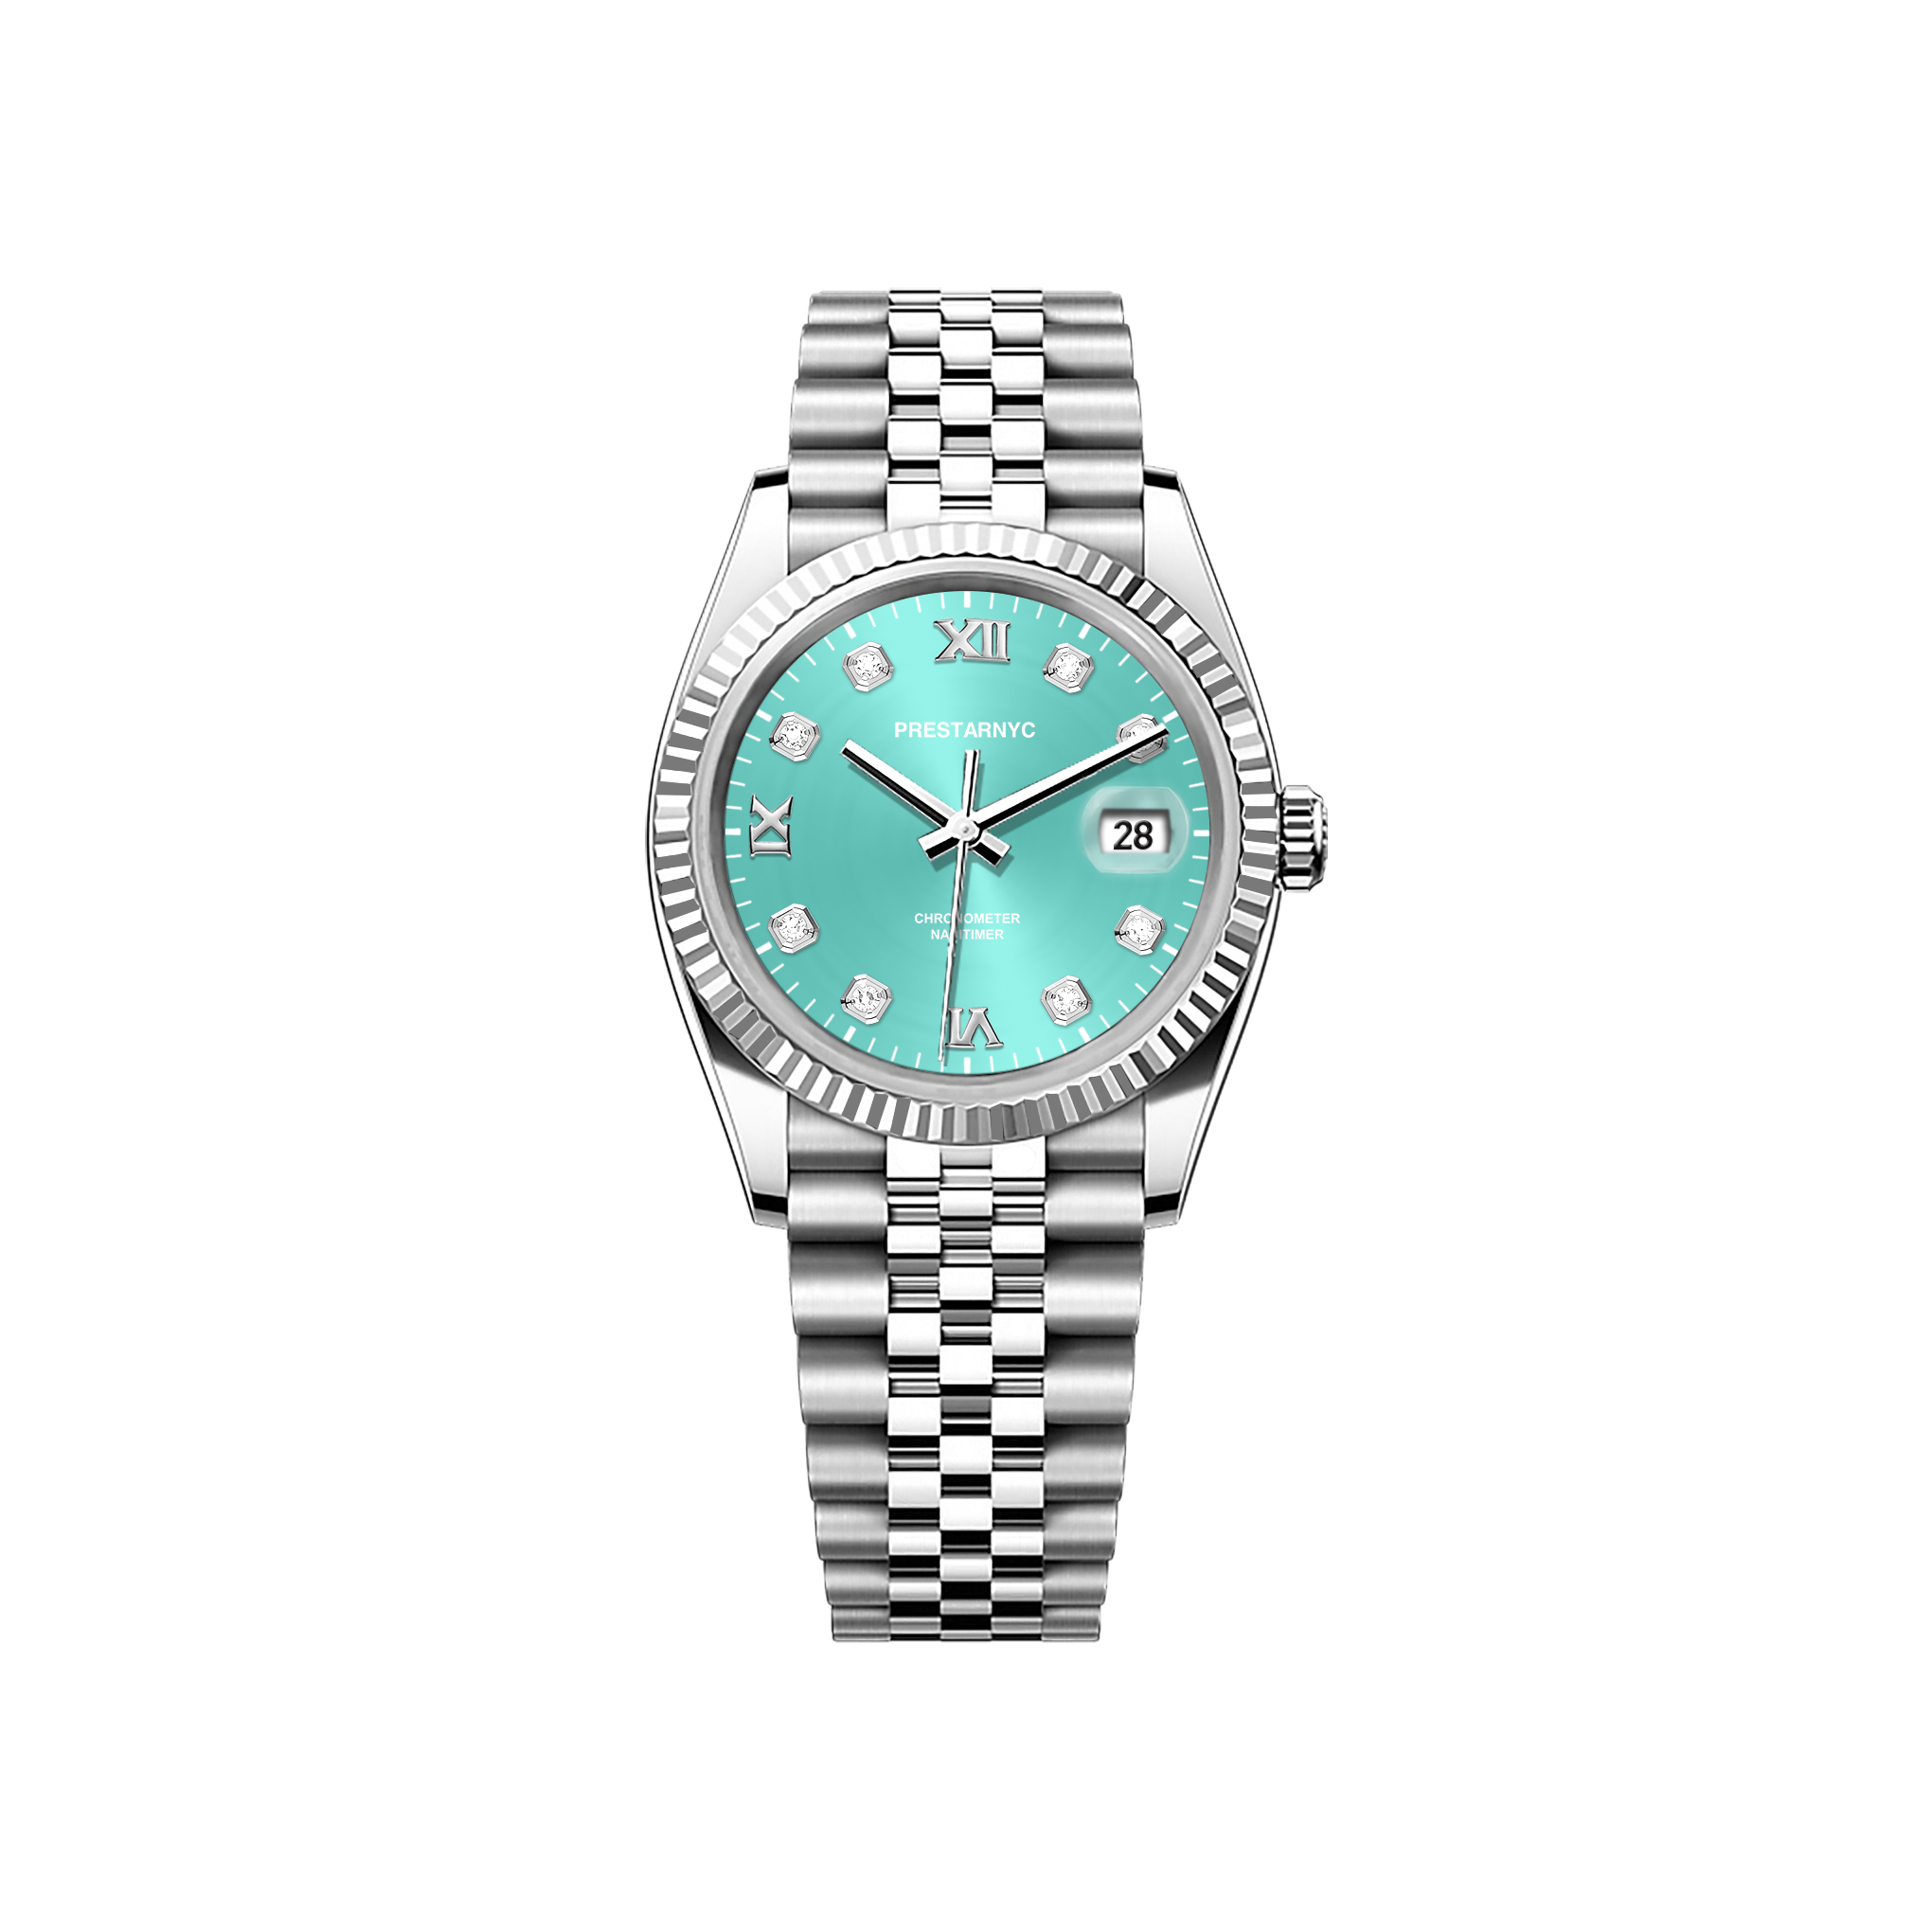 Prestar NYC Diary Classic Watch (Blue Turquoise)